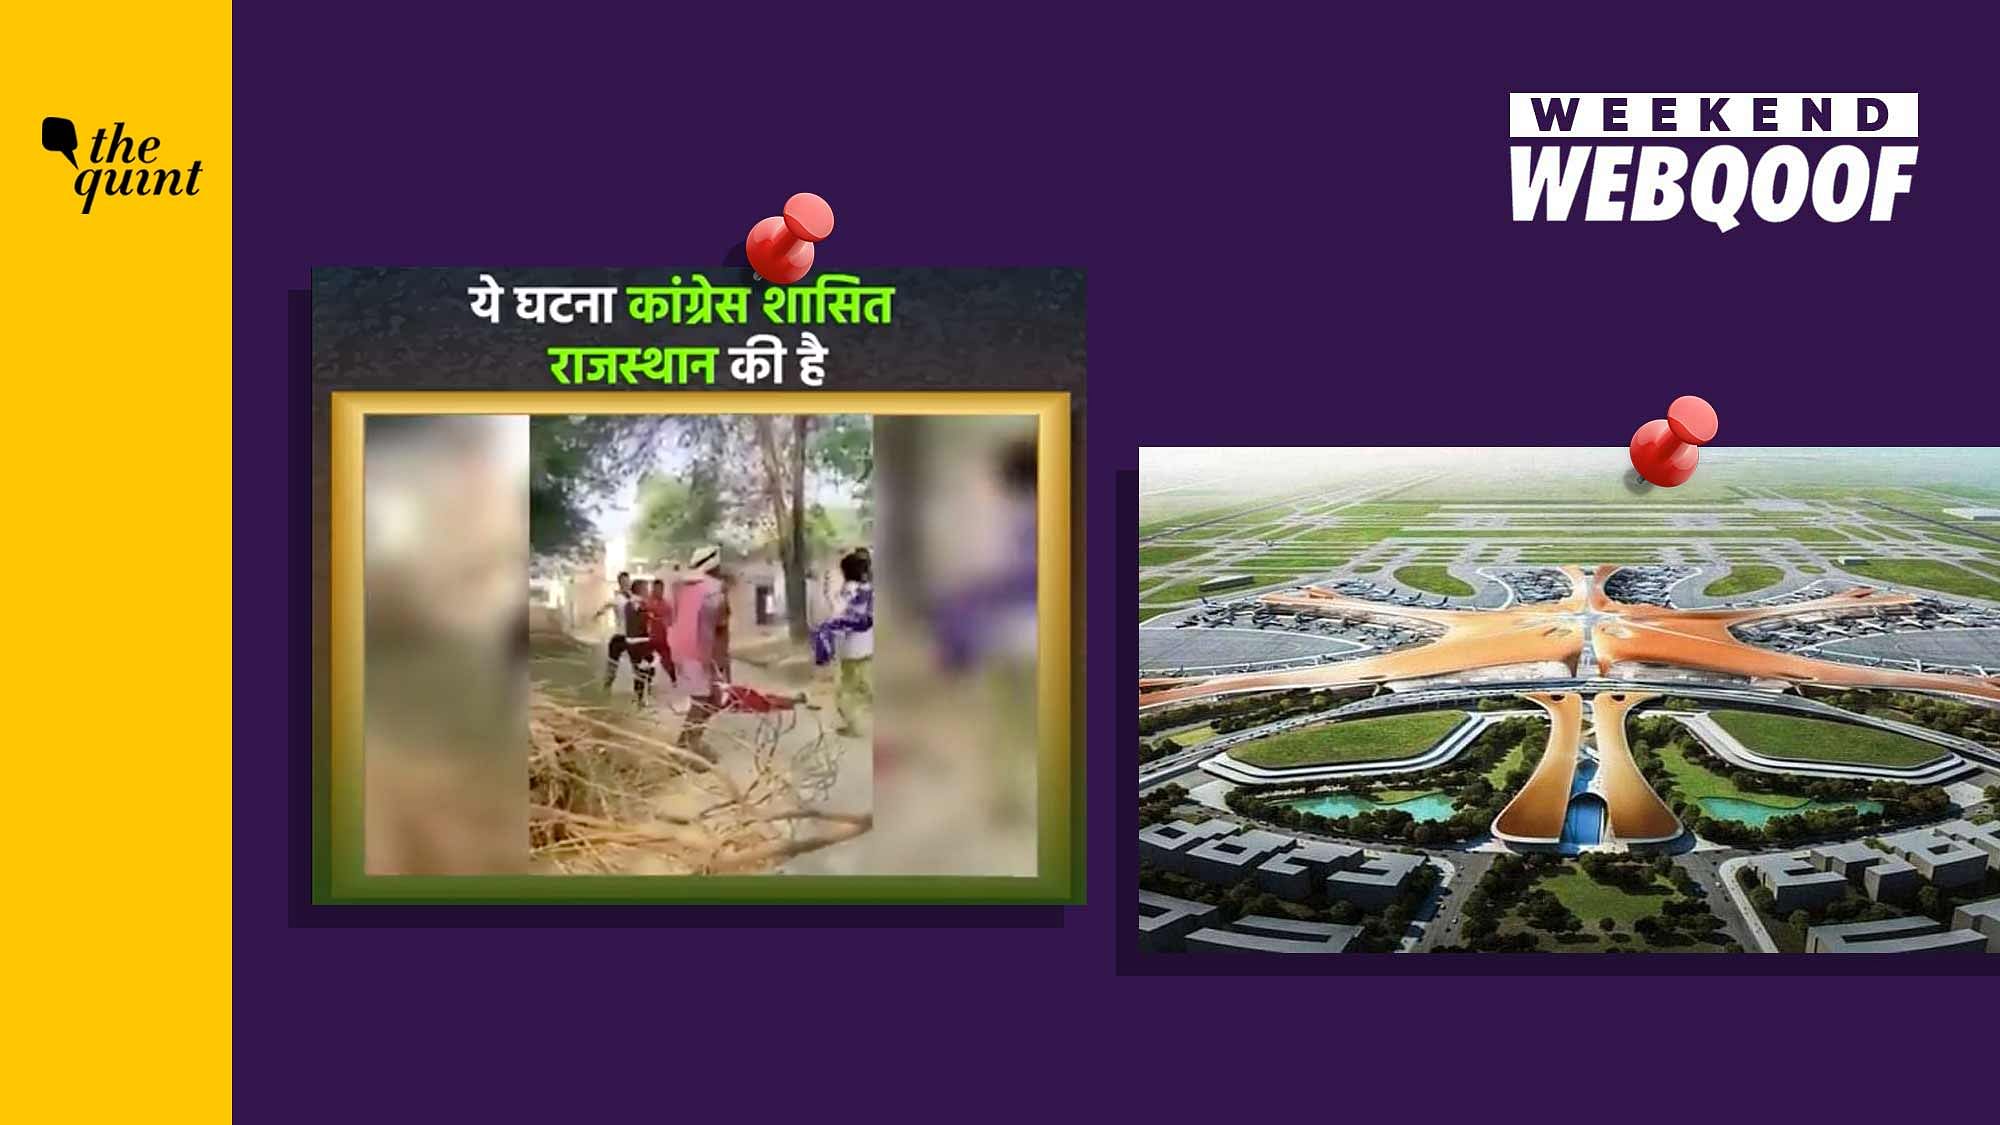 <div class="paragraphs"><p>From video of Amethi in UP shared as from Rajasthan to misinformation around new Noida international airport.</p></div>